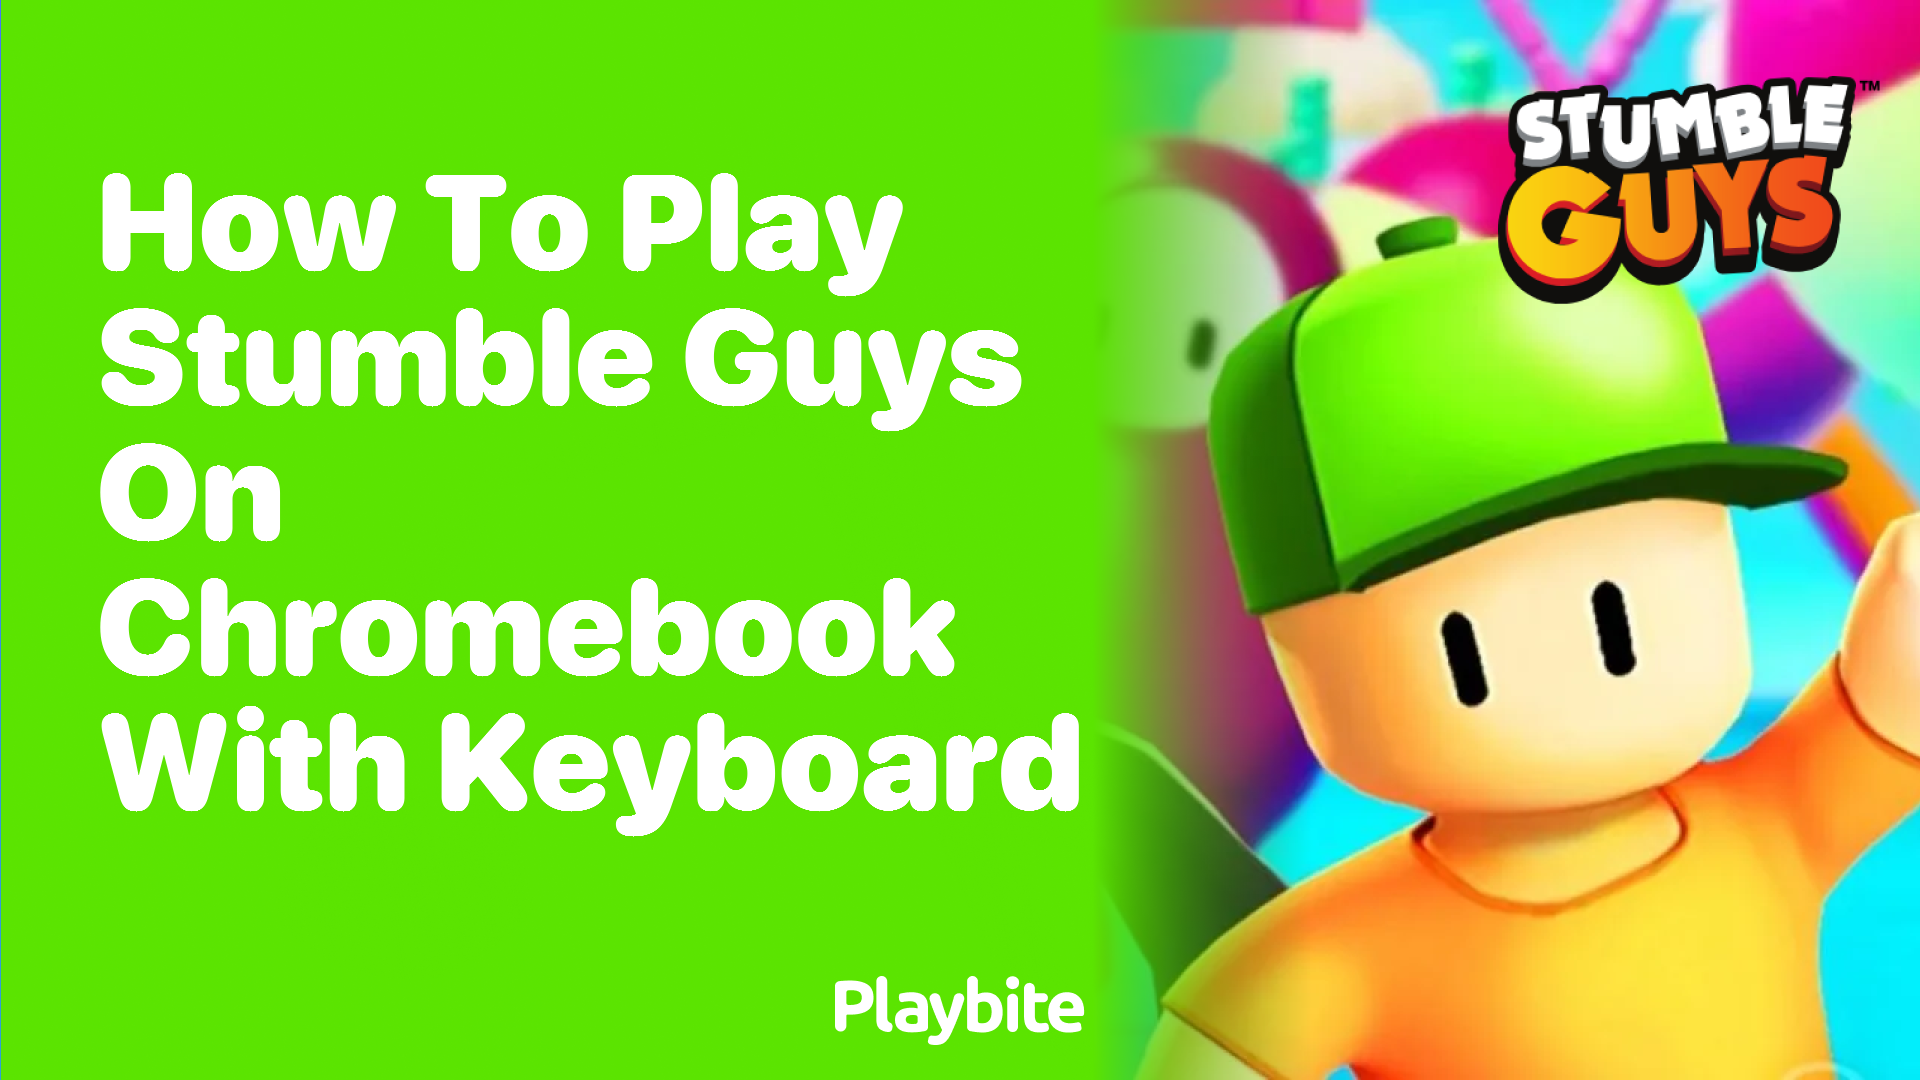 How to Play Stumble Guys on a Chromebook with a Keyboard